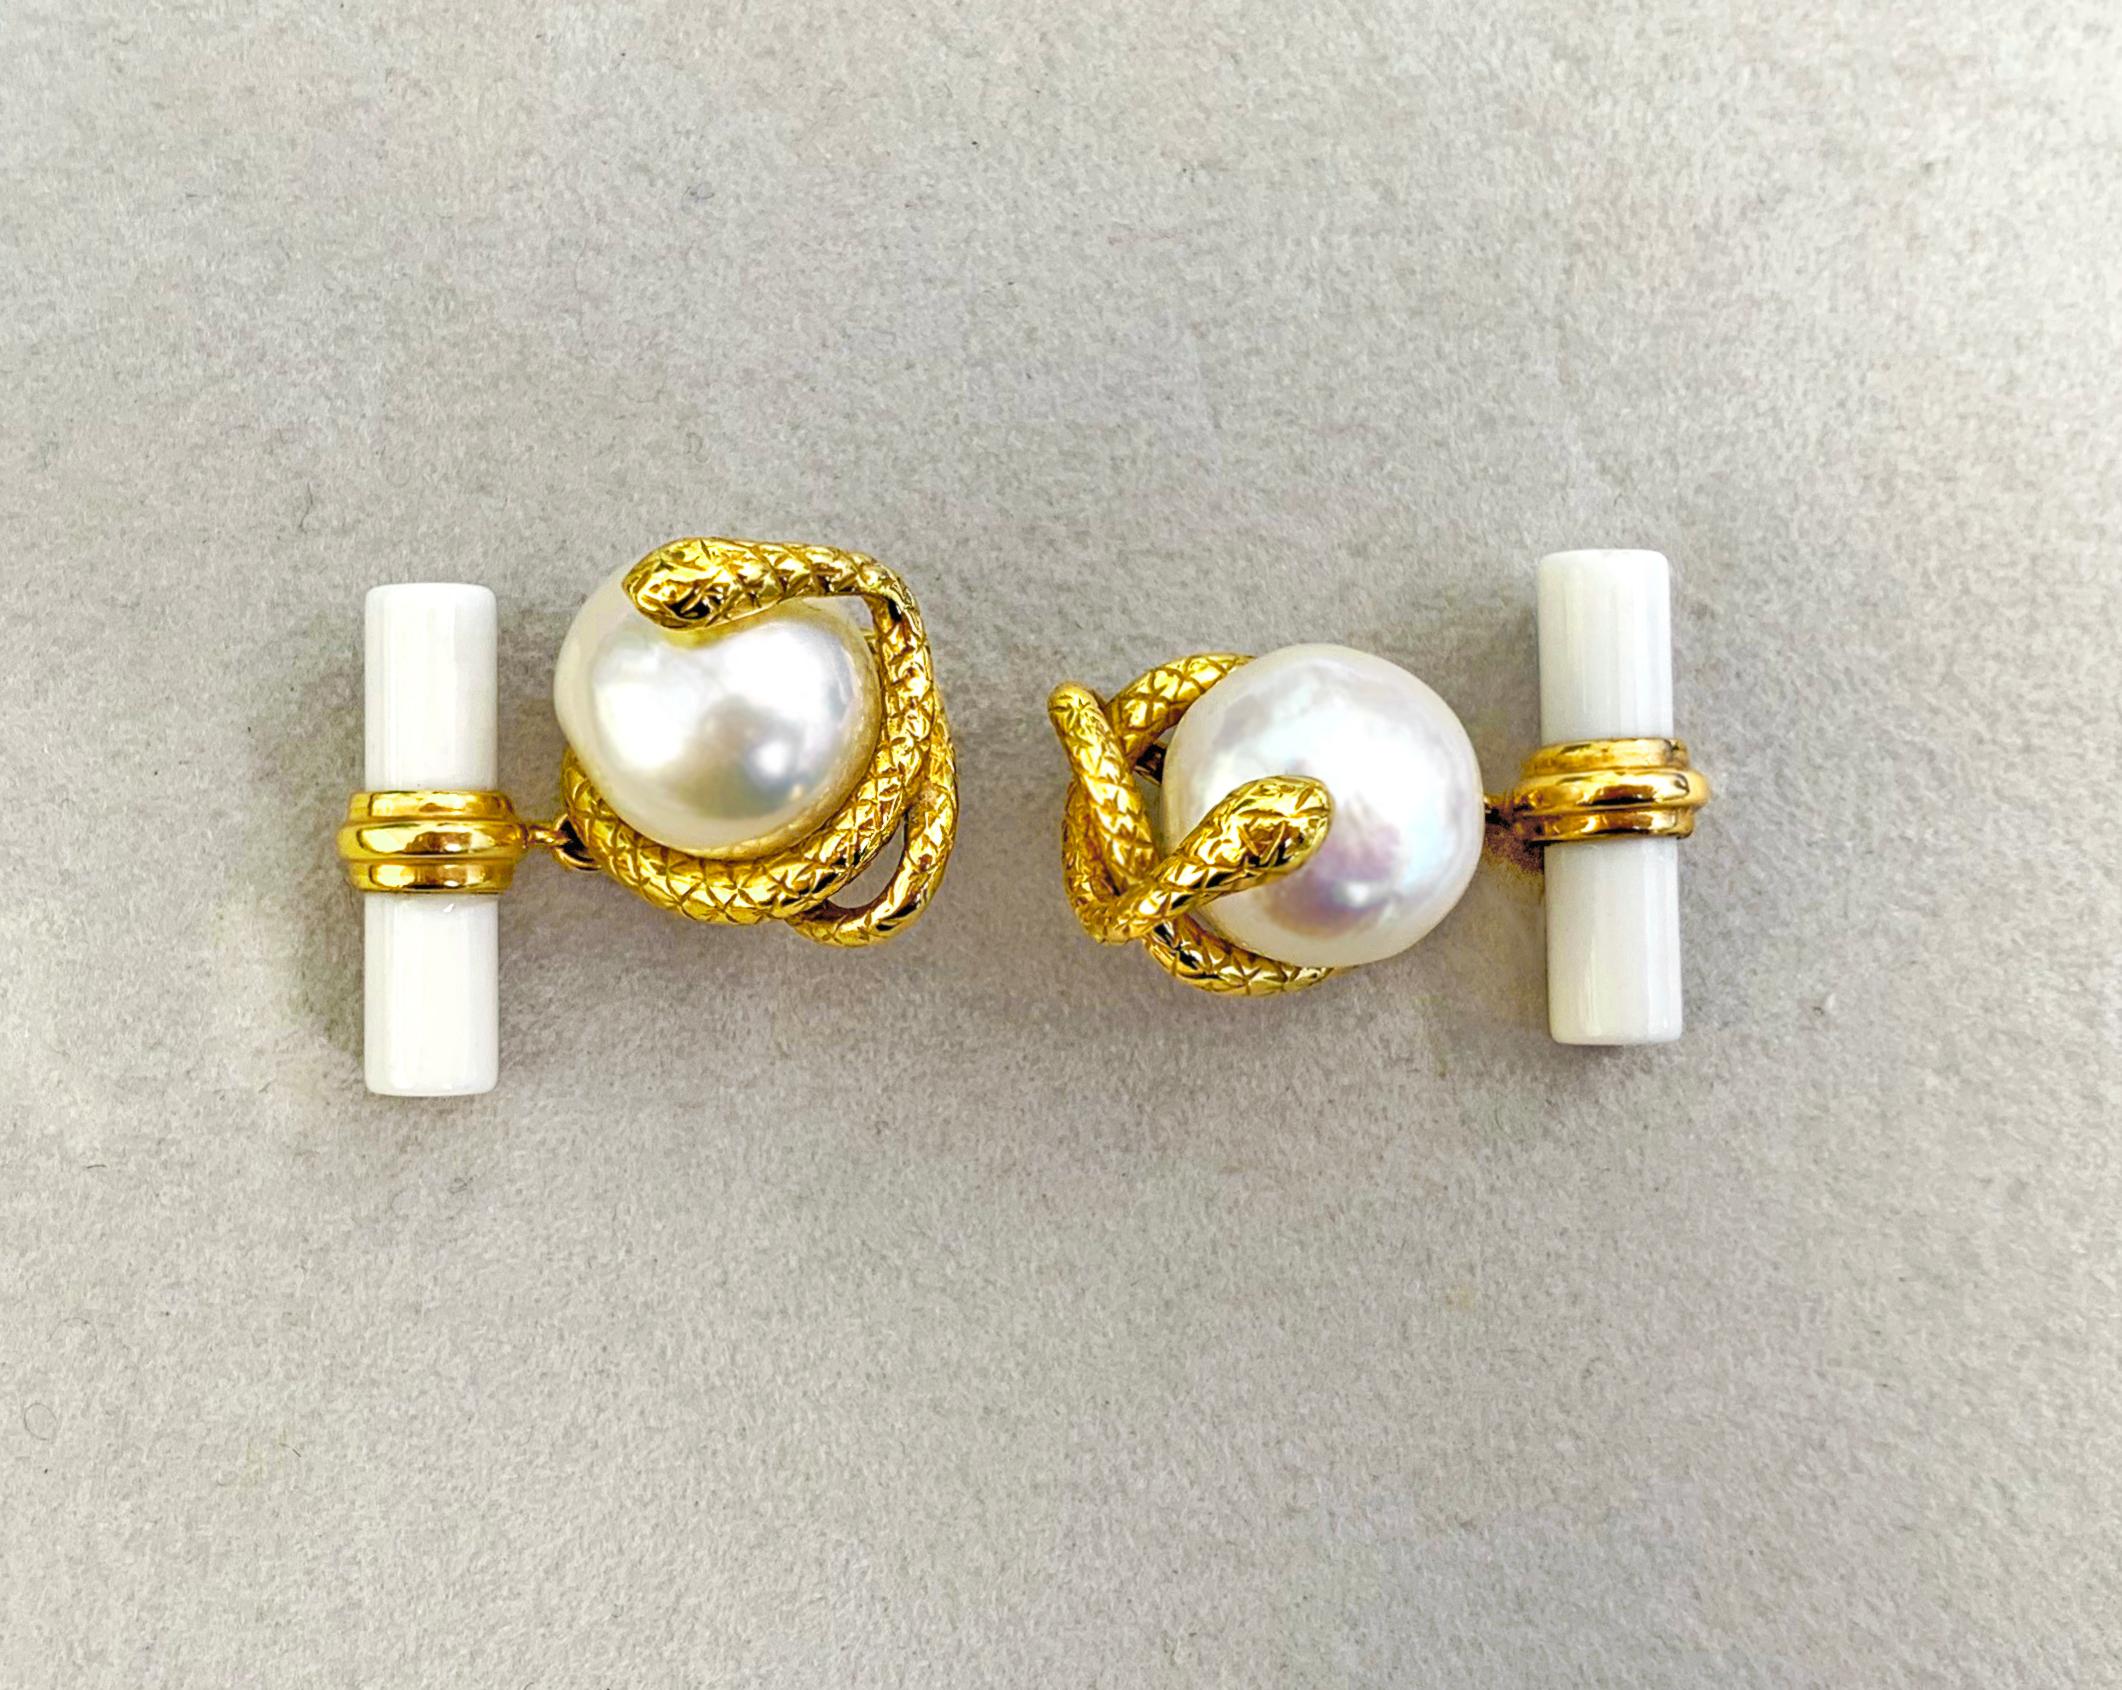 Square Cut 18 Karat Yellow Gold Pearl and White Agate Snake Cufflinks For Sale